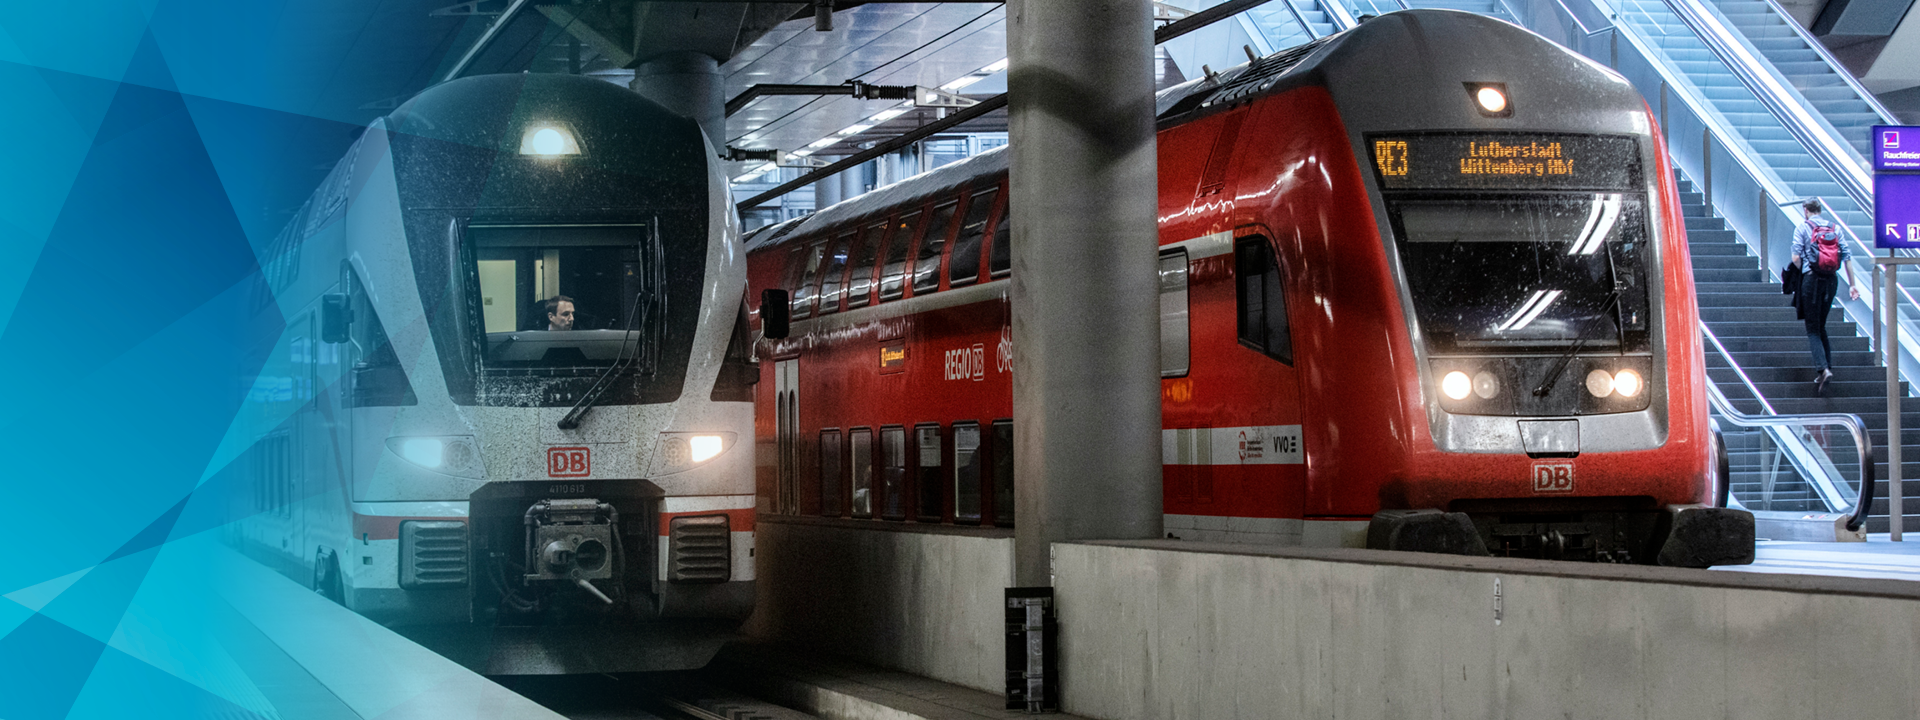 Two trains side by side in a station